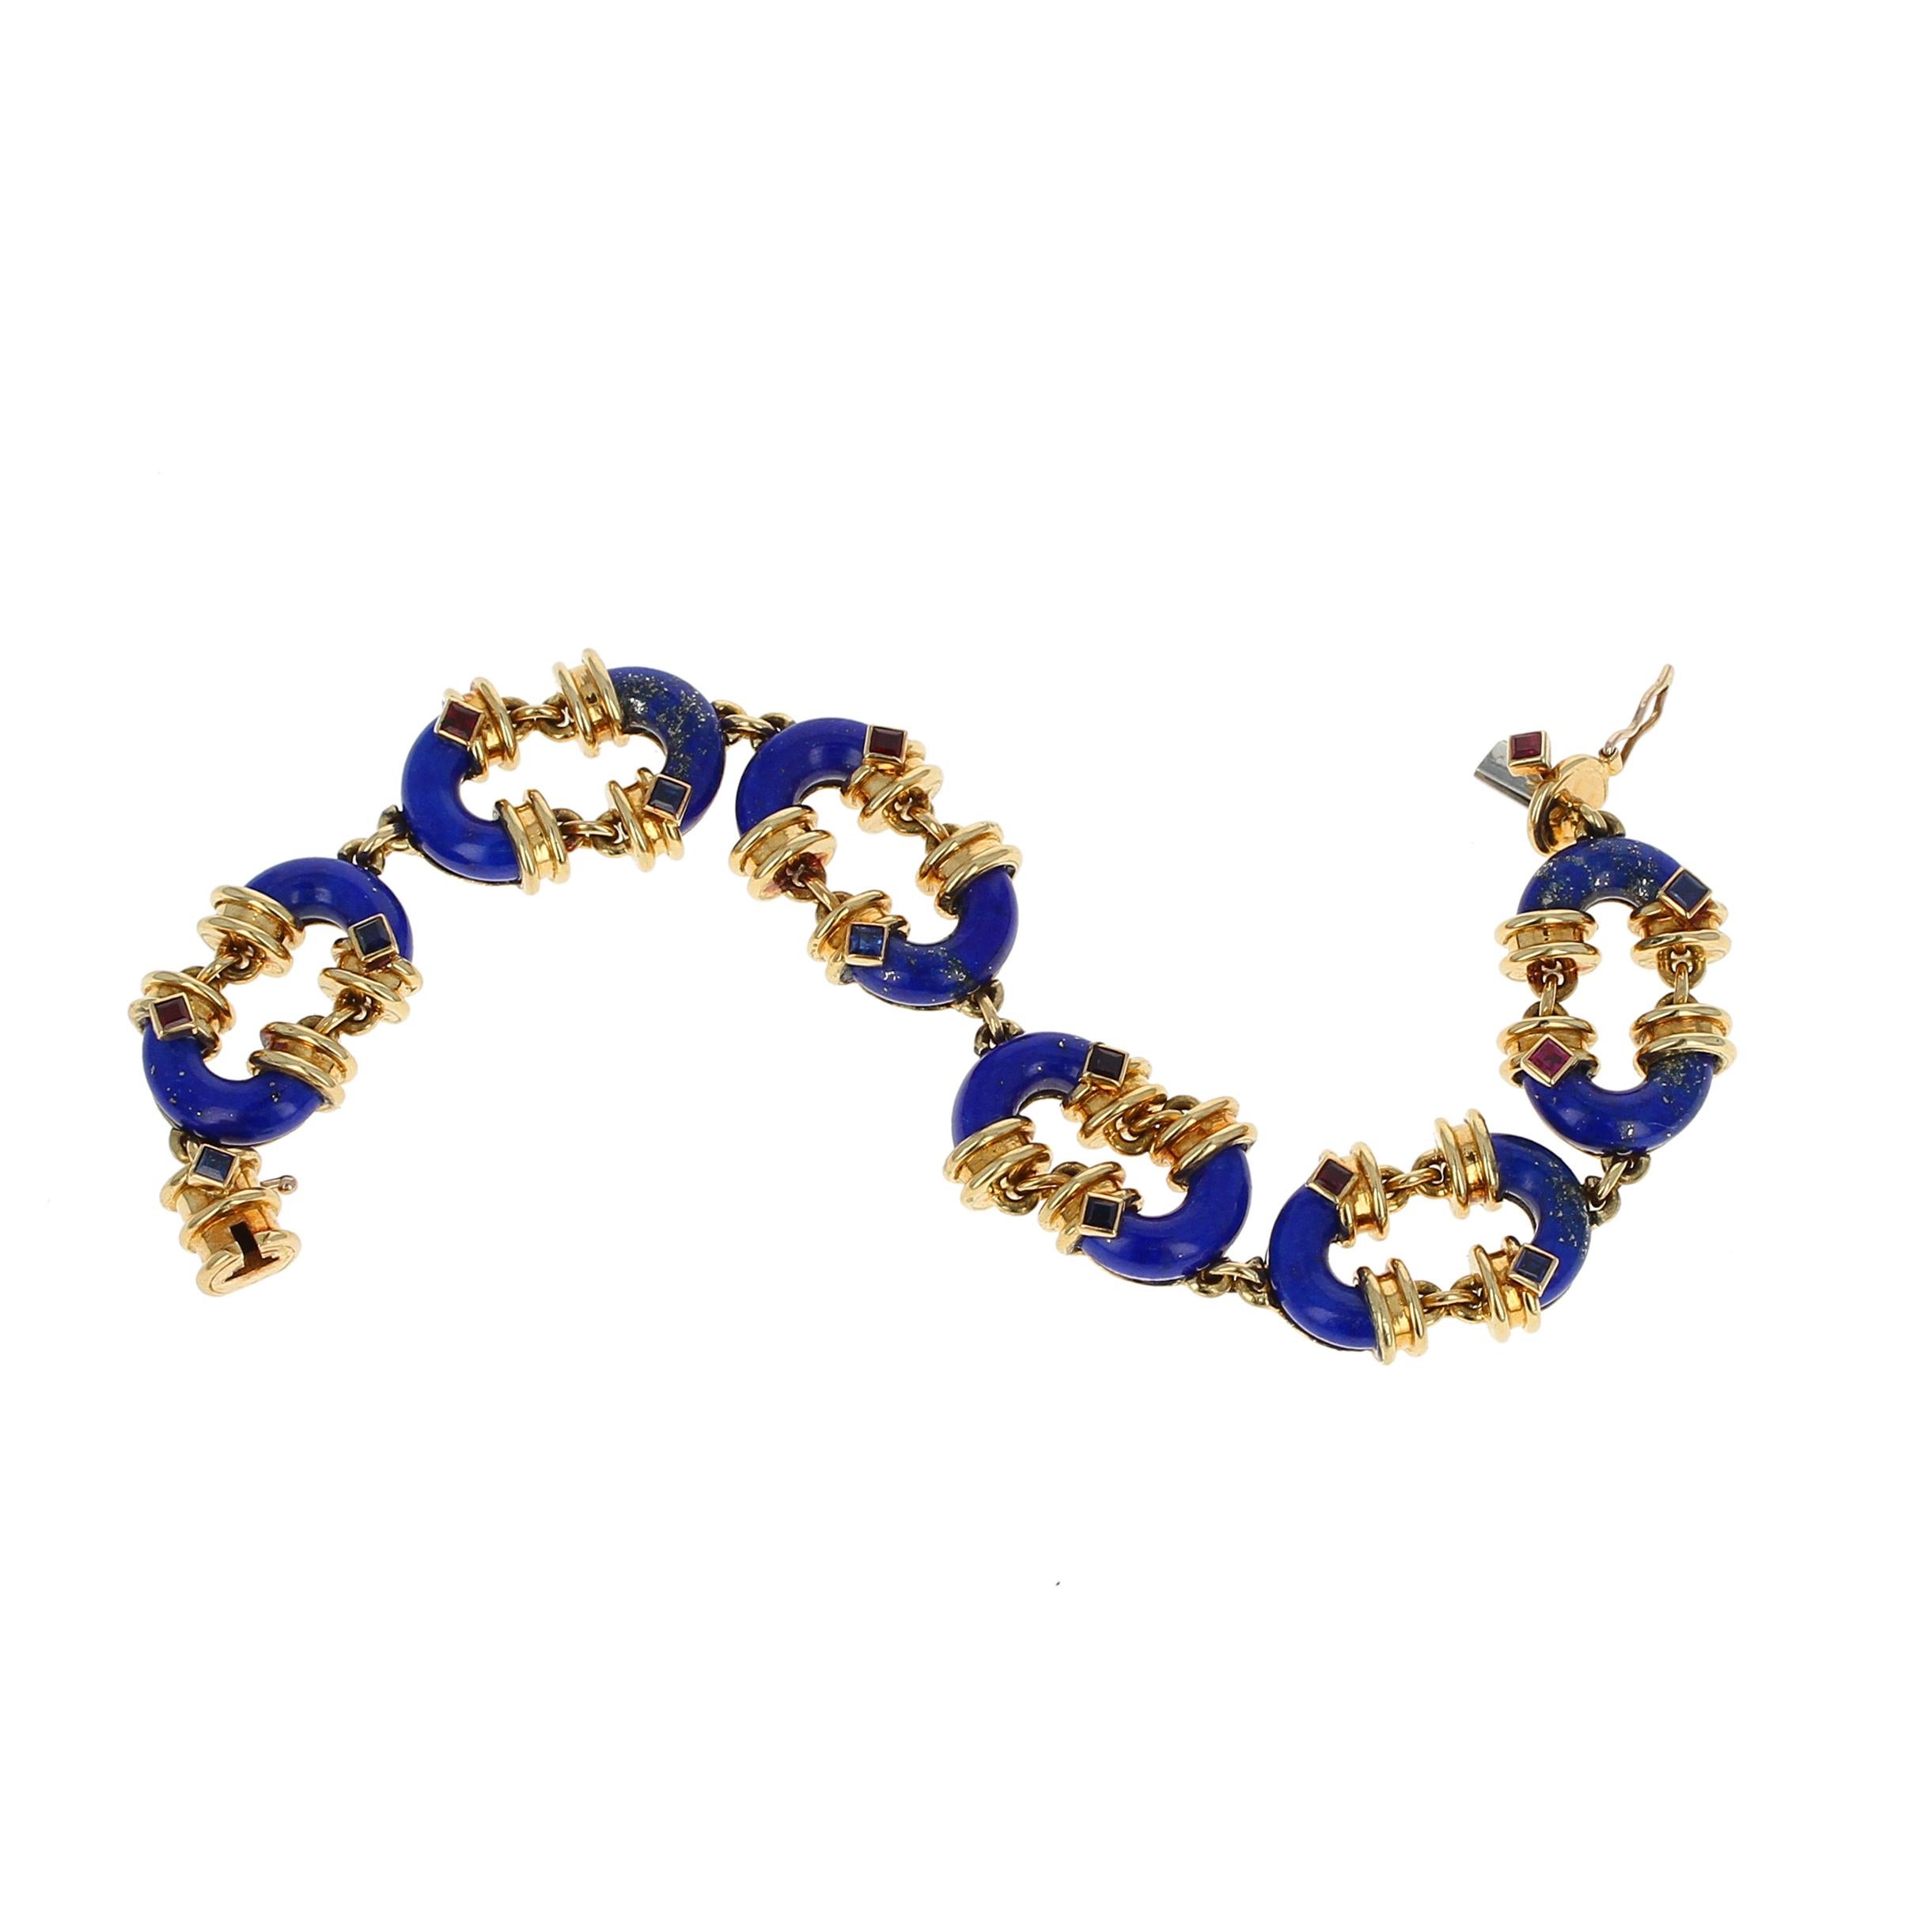 A remarkable and chic Lapis Lazuli bracelet by Cartier. This link bracelet, designed with Cartier's symbolic 'C', is entirely crafted with 18kt yellow gold and set with alternating square-cut rubies and sapphires. The bracelet is stamped Cartier